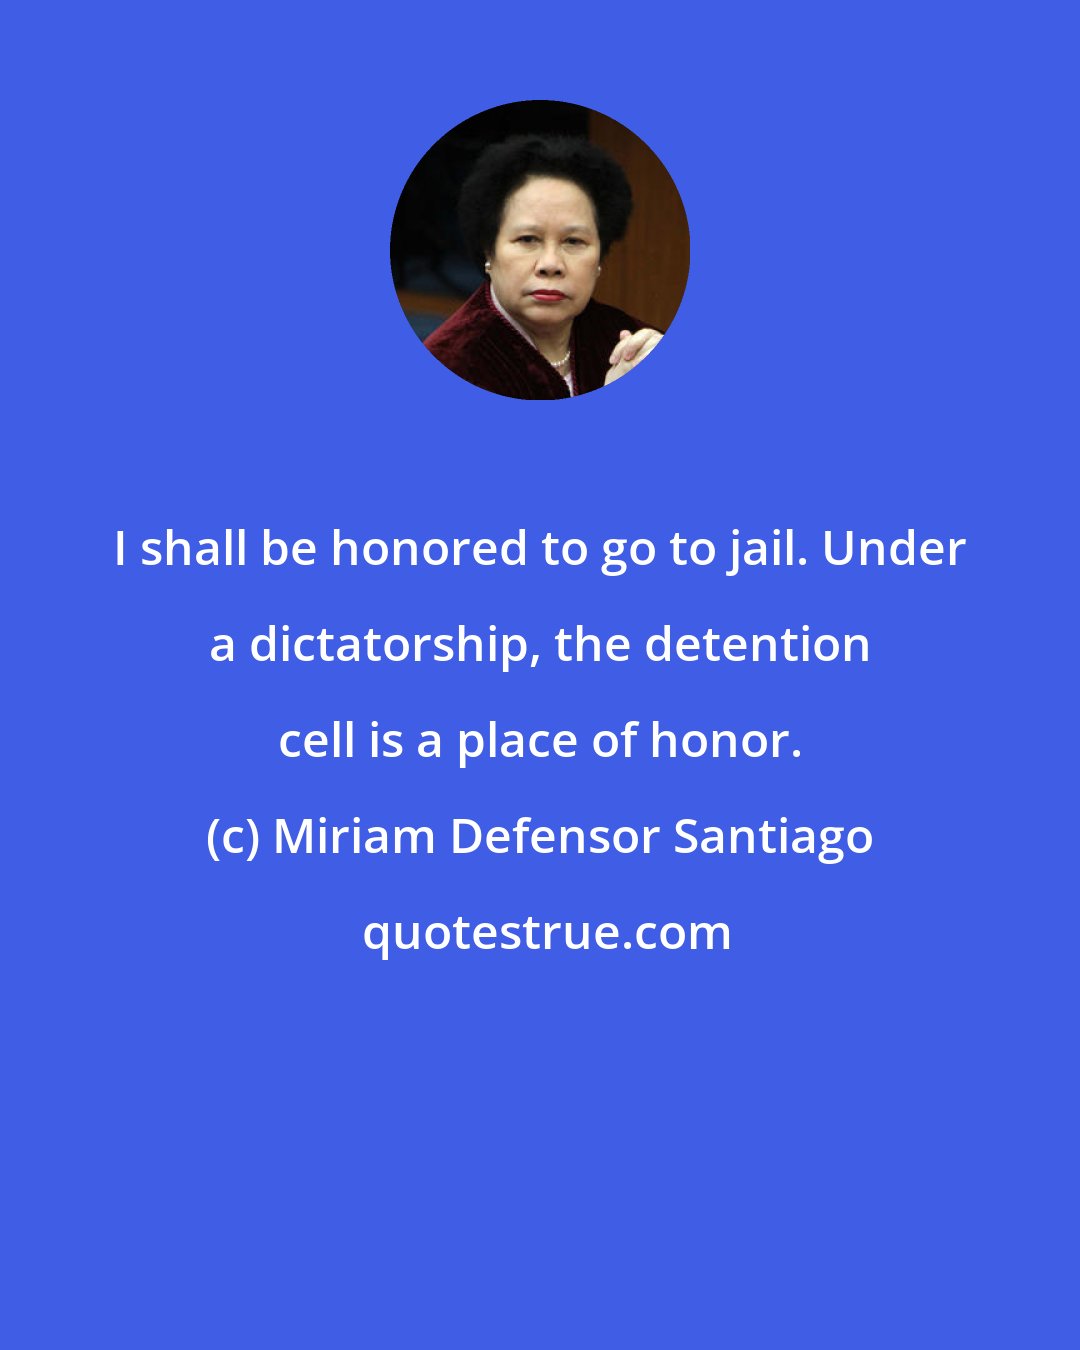 Miriam Defensor Santiago: I shall be honored to go to jail. Under a dictatorship, the detention cell is a place of honor.